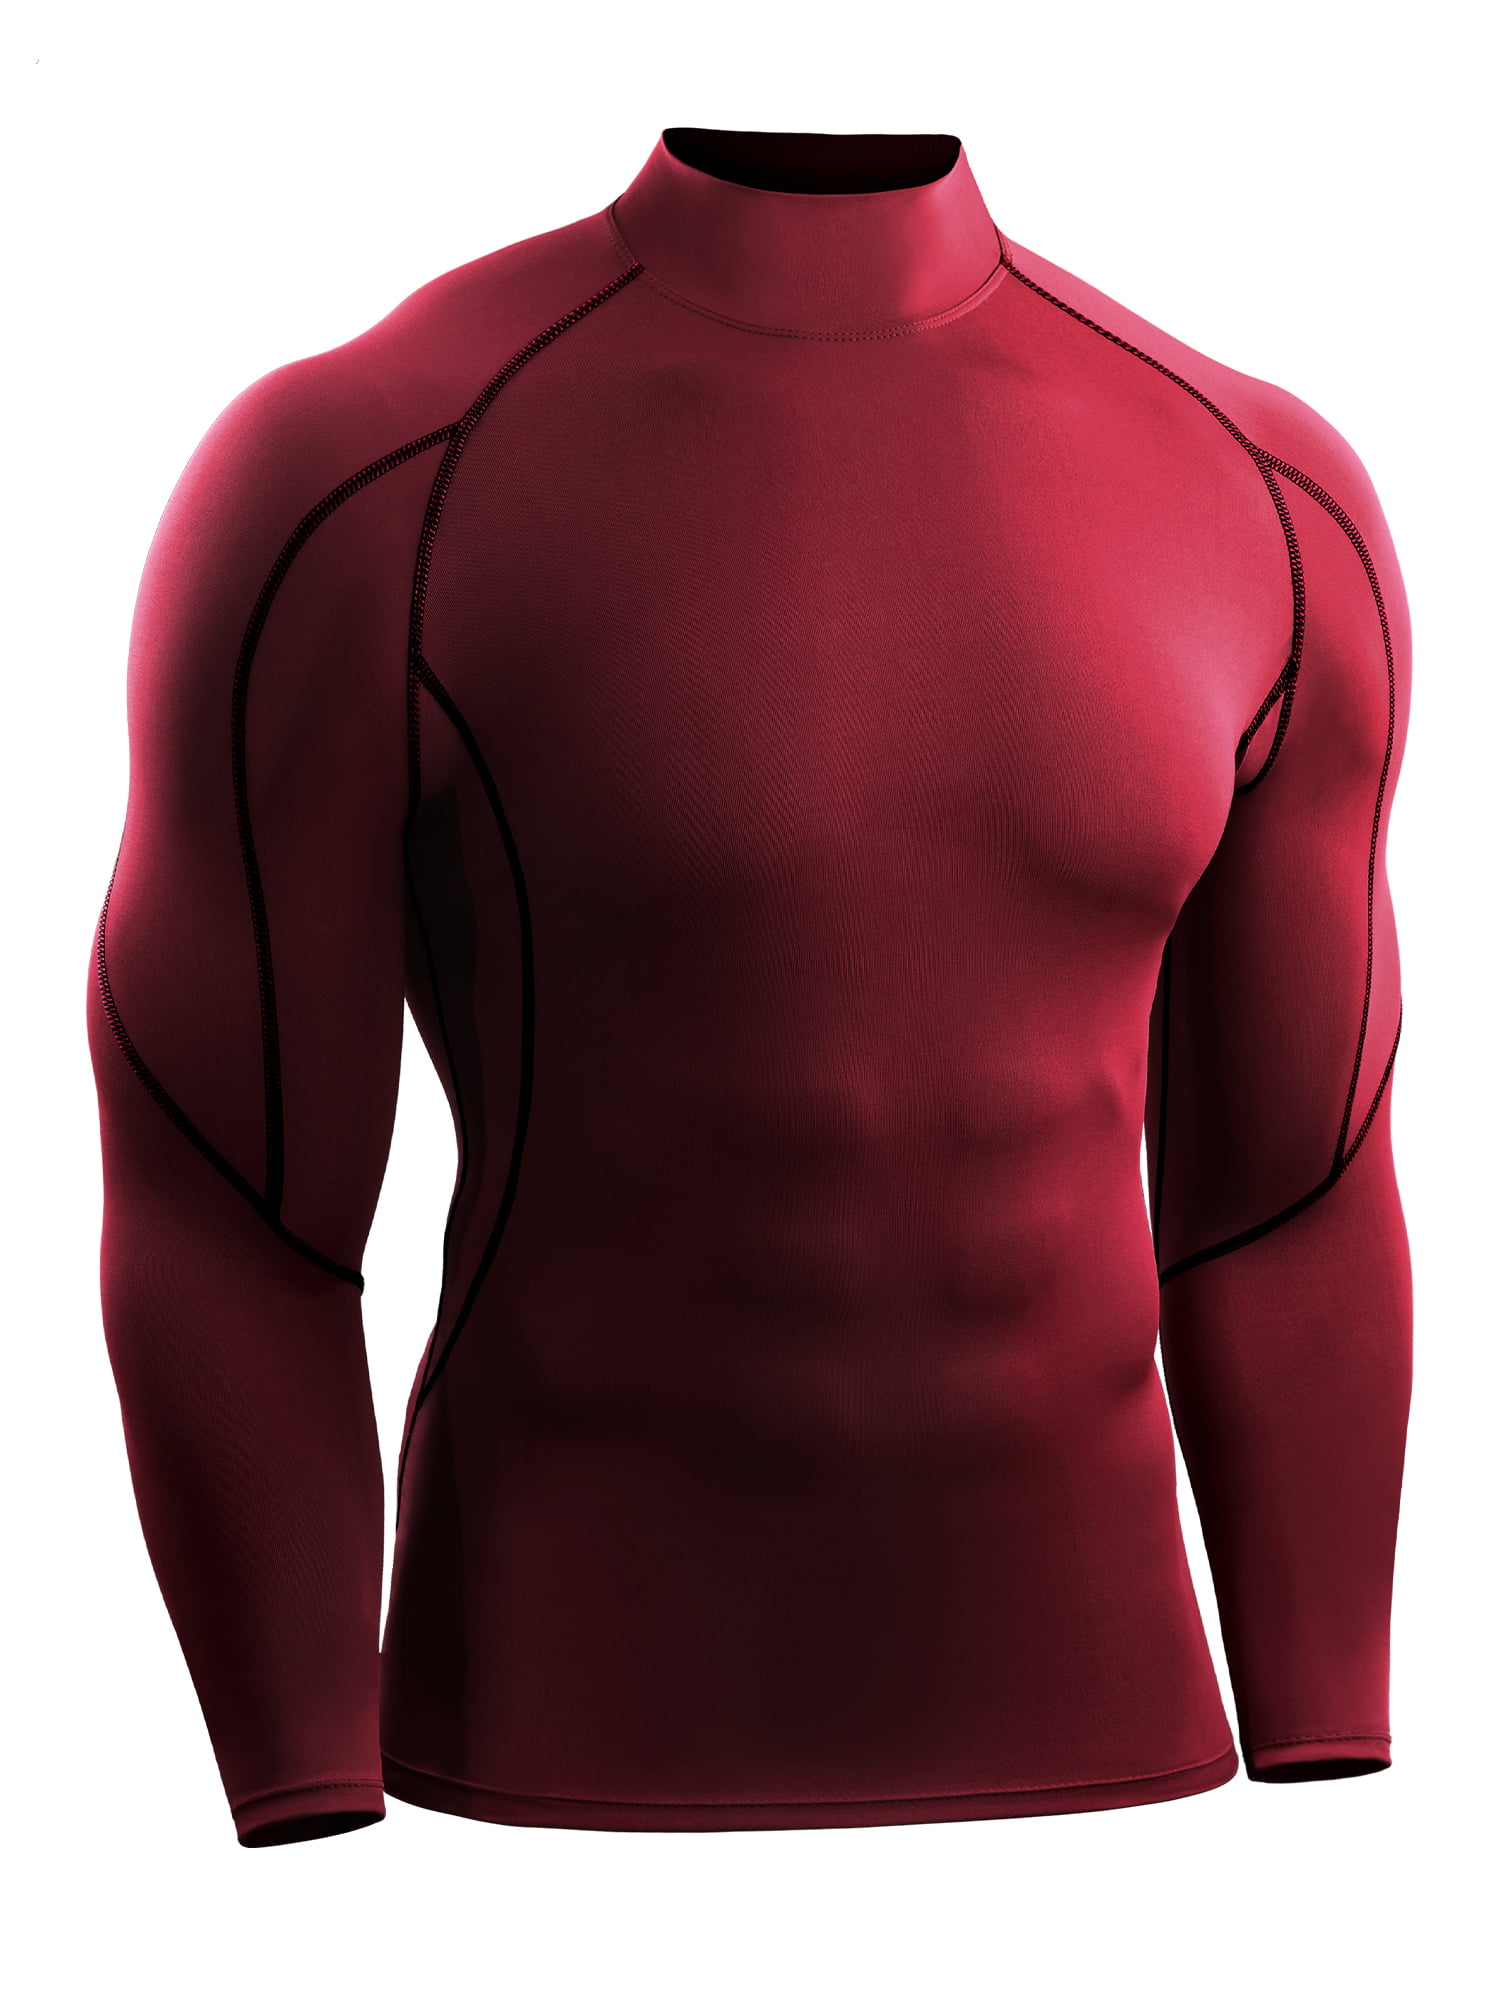 Men's Compression Base Layer Top Long Sleeve Thermal Sports Fitness Shirt Top 